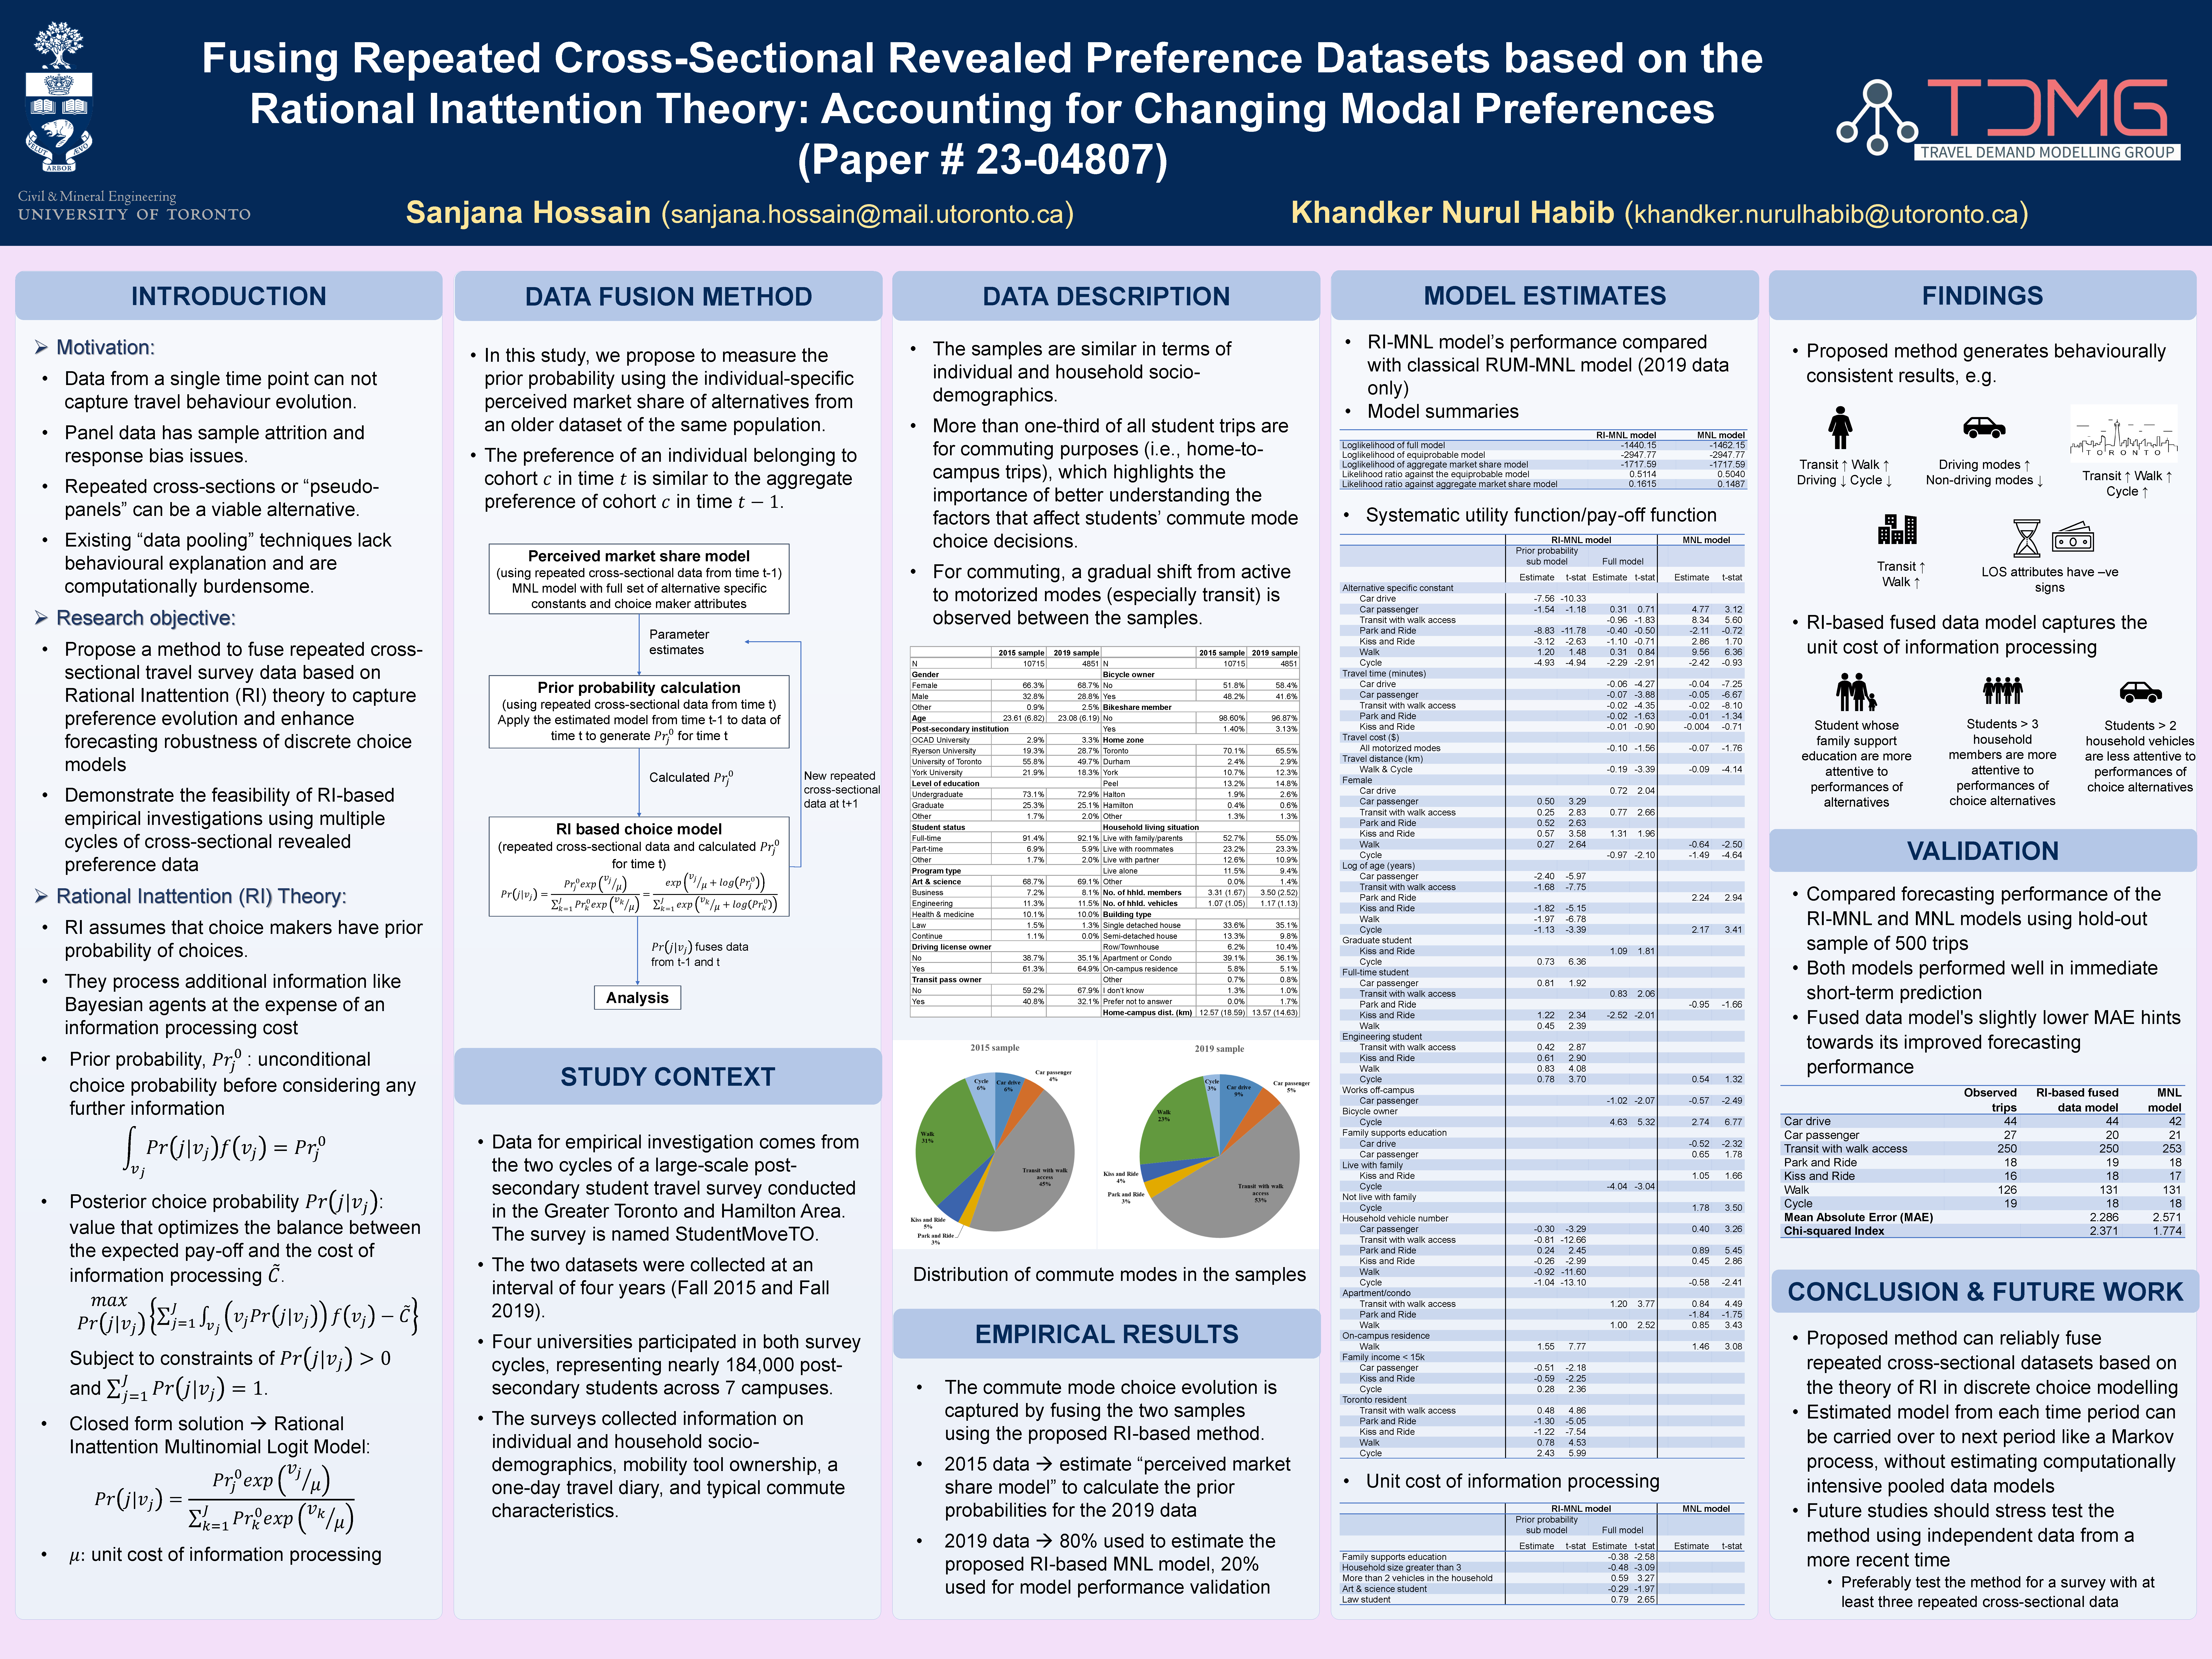 TRB 2023 Research Poster. Title: Fusing Repeated Cross-sectional Revealed Preference Datasets based on Rational Inattention Theory: Accounting for Changing Modal Preferences. Authors: Sanjana Hossain, Khandker Nurul Habib.